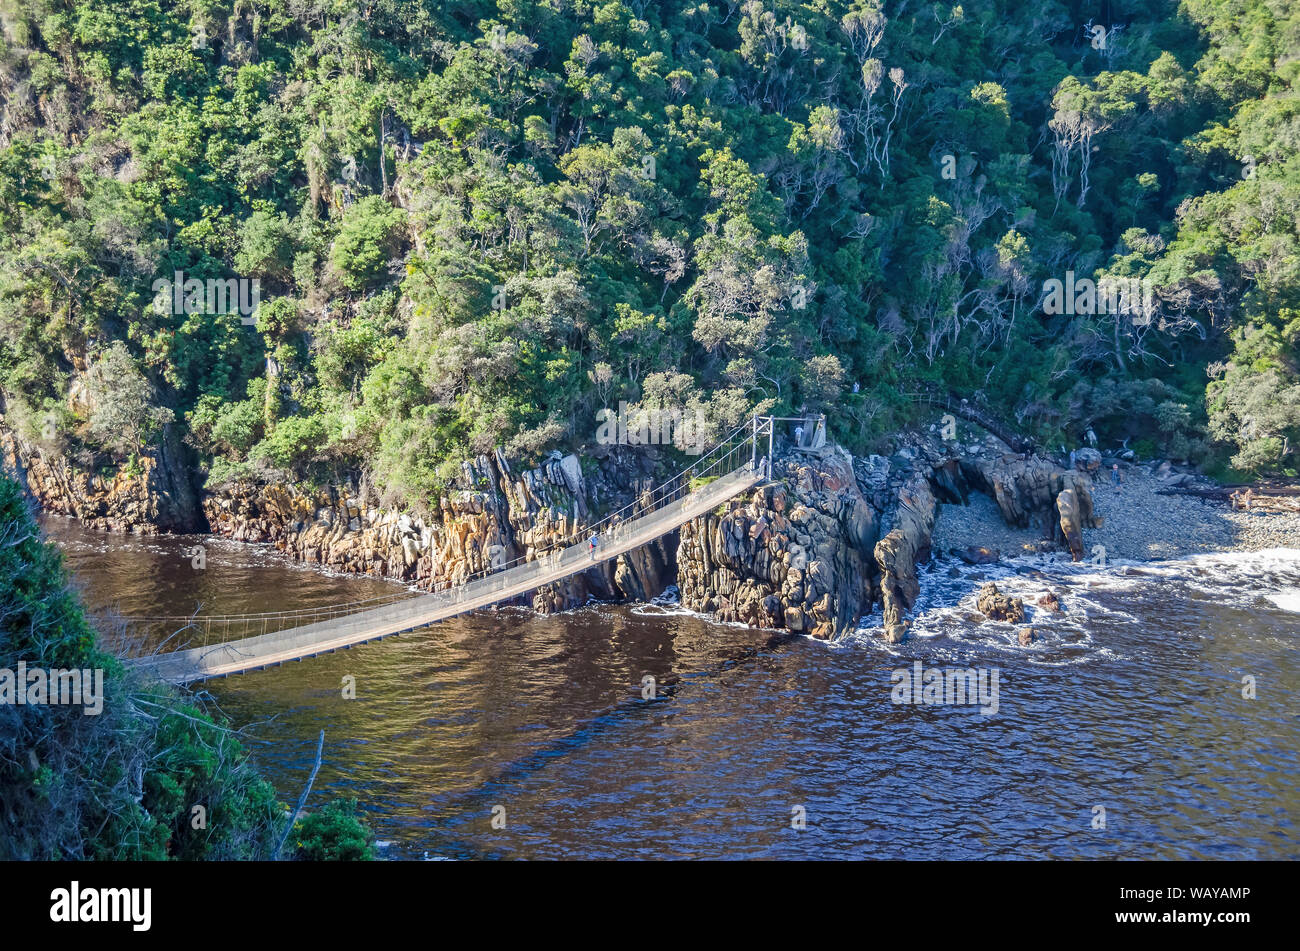 Suspension footbridge over the Storms River in the Tsitsikamma National Park, a part of a hiking trail along the Garden Route coast of South Africa Stock Photo